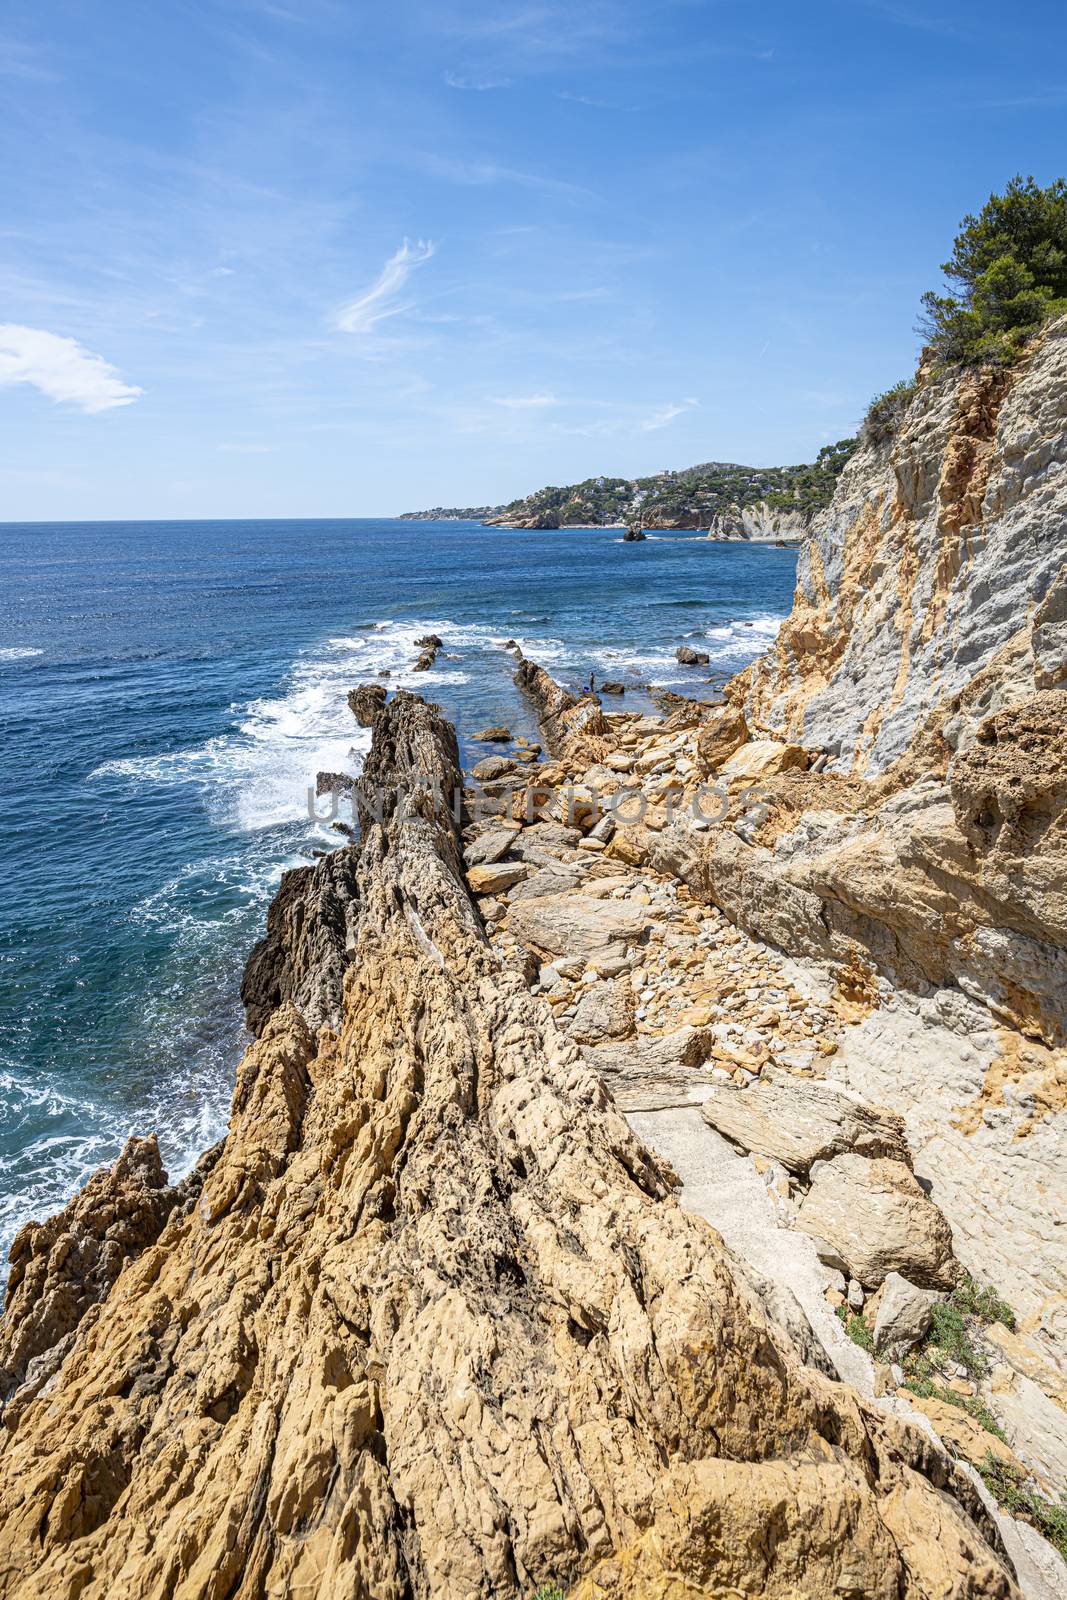 Landscape of Rocky area near the Mediterranean sea at the Calanque of Figuieres, creek of Figuieres, South of France, Europe